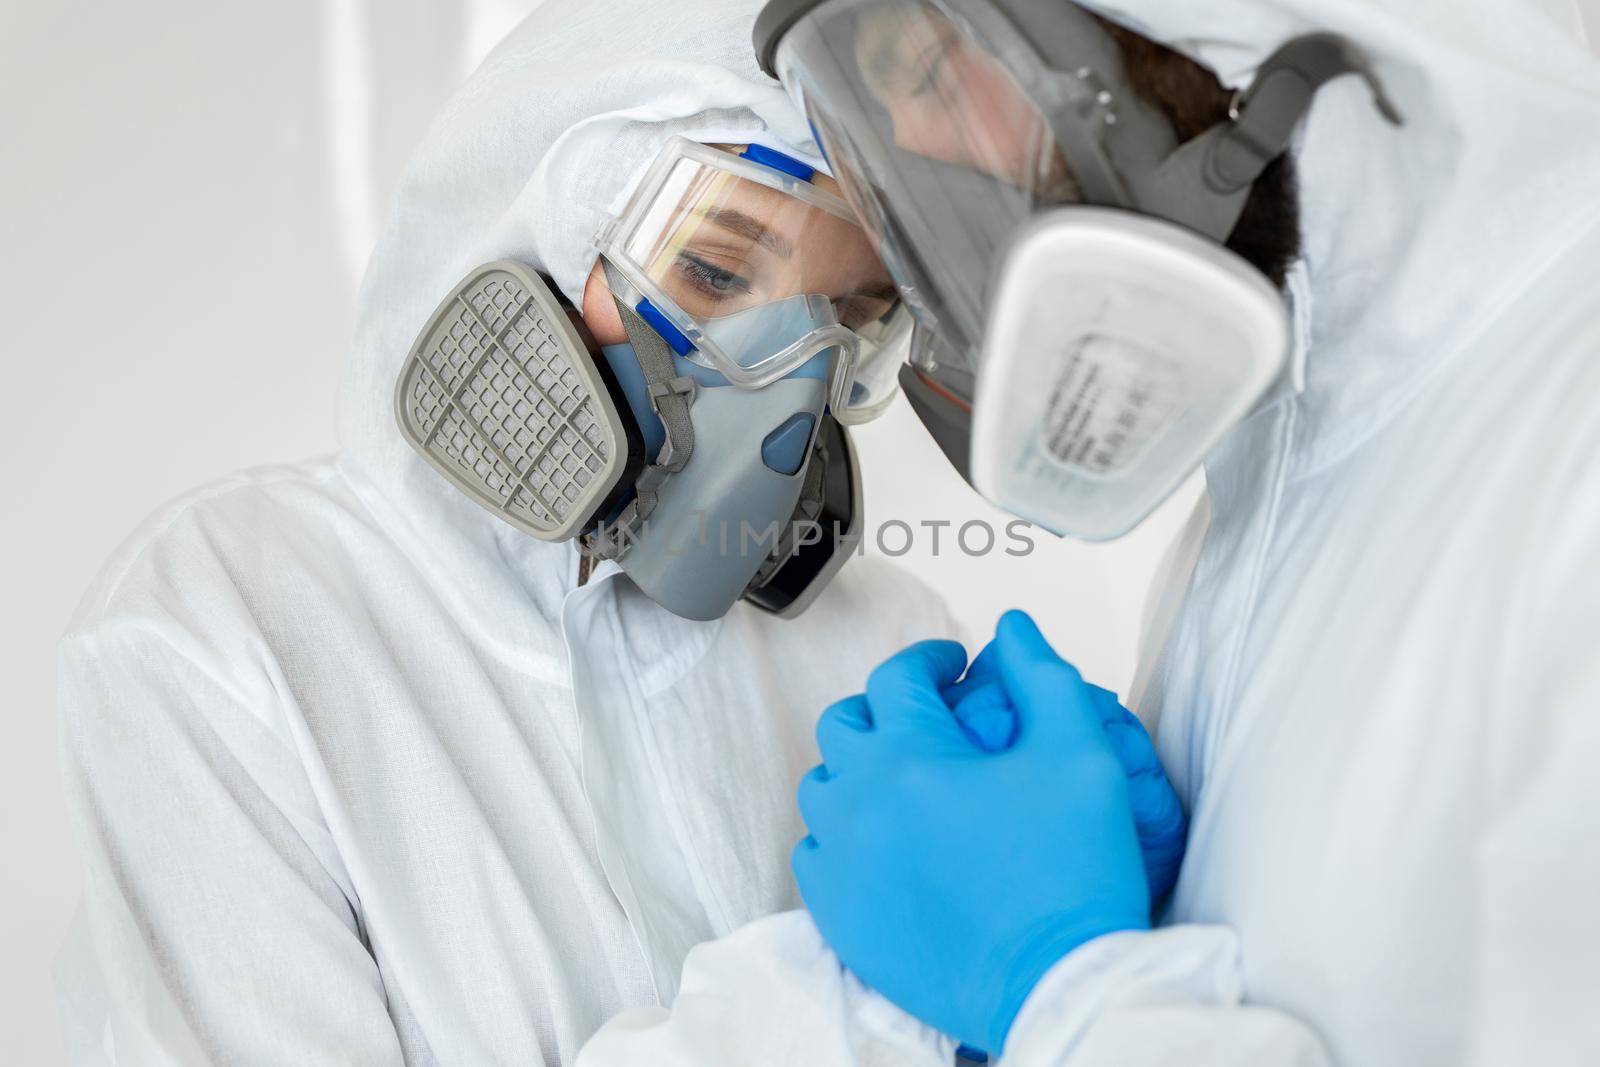 Portraits of the doctor: a man and a woman in protective suits and respirators holding hands during quarantine. Covid-19 by StudioPeace